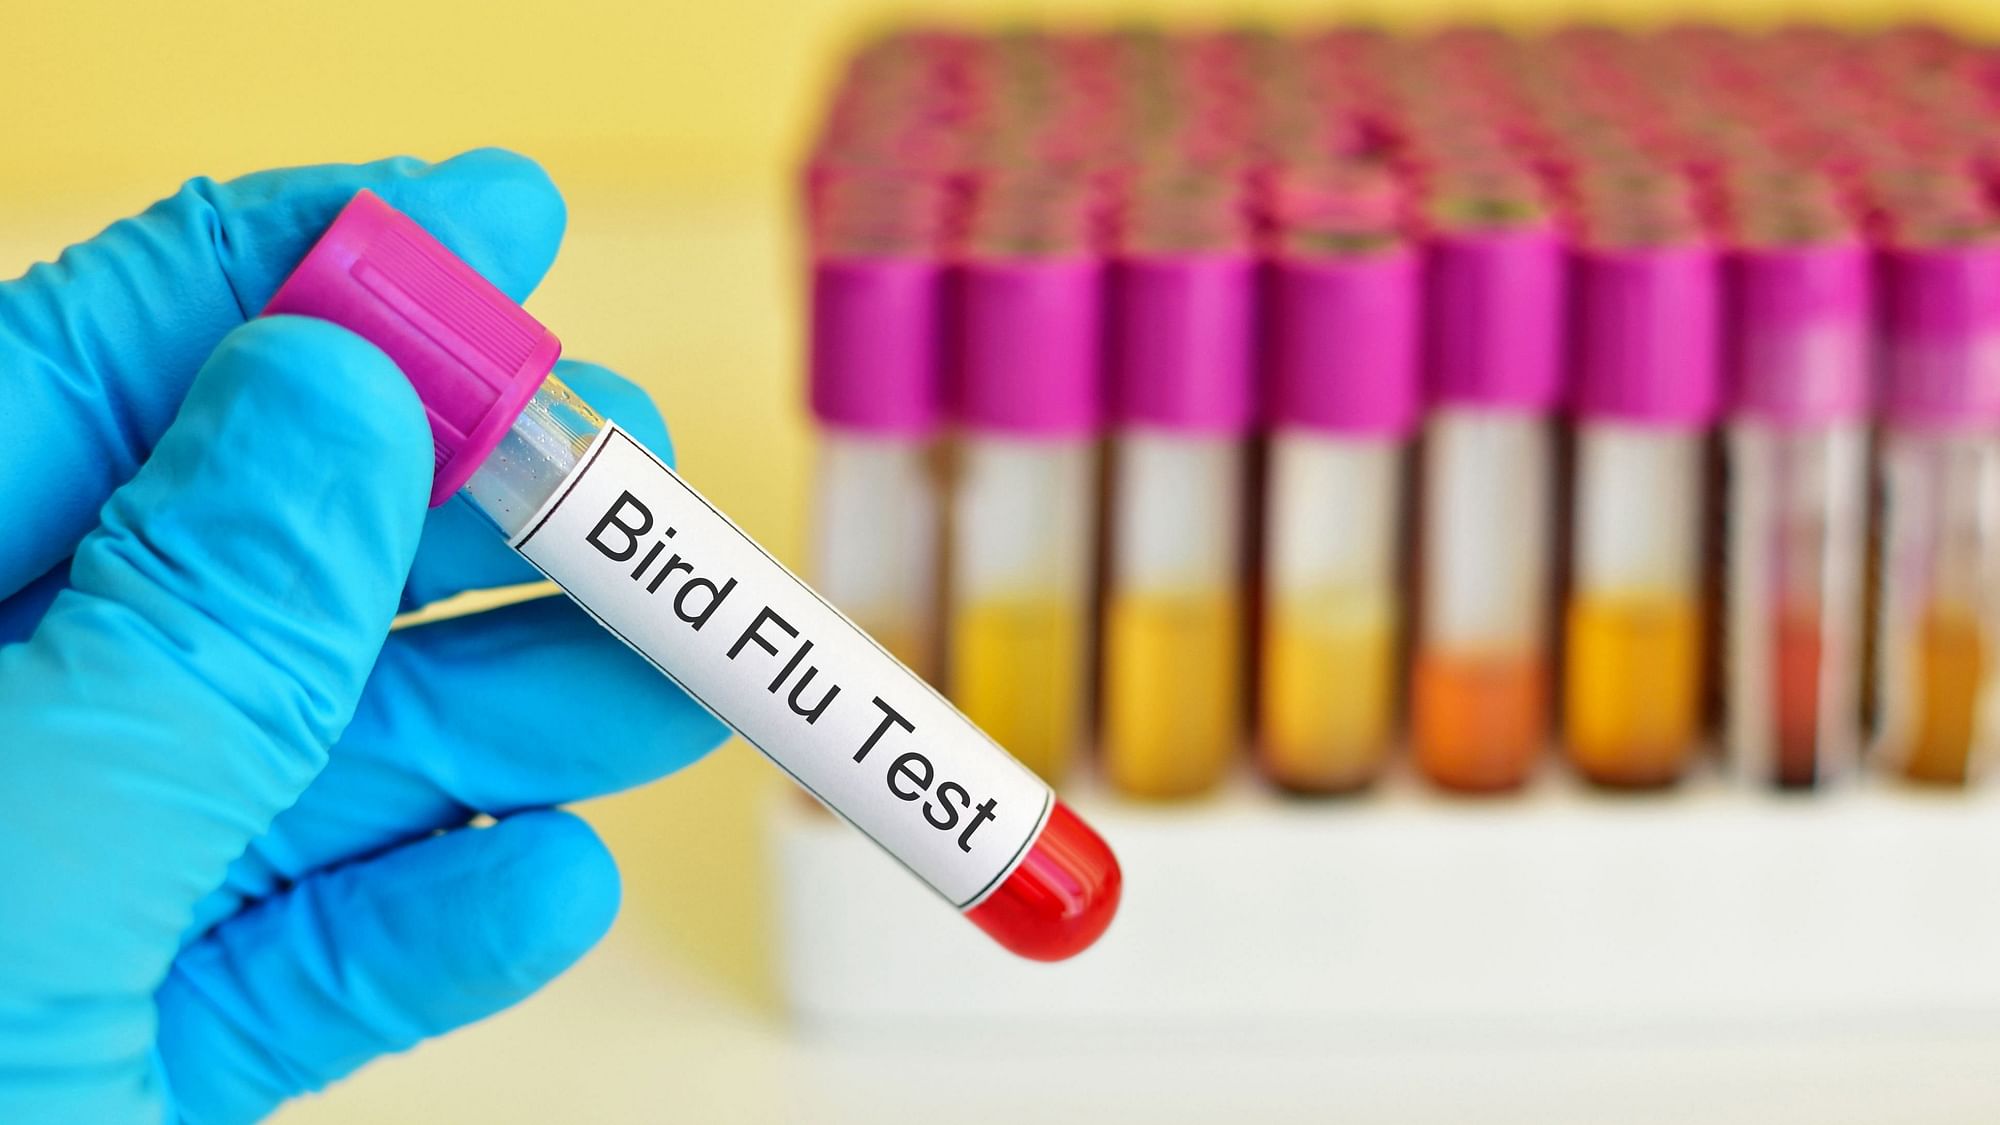 Bird flu: The H10N3 strain of bird flu has been detected in humans for the first time in China.